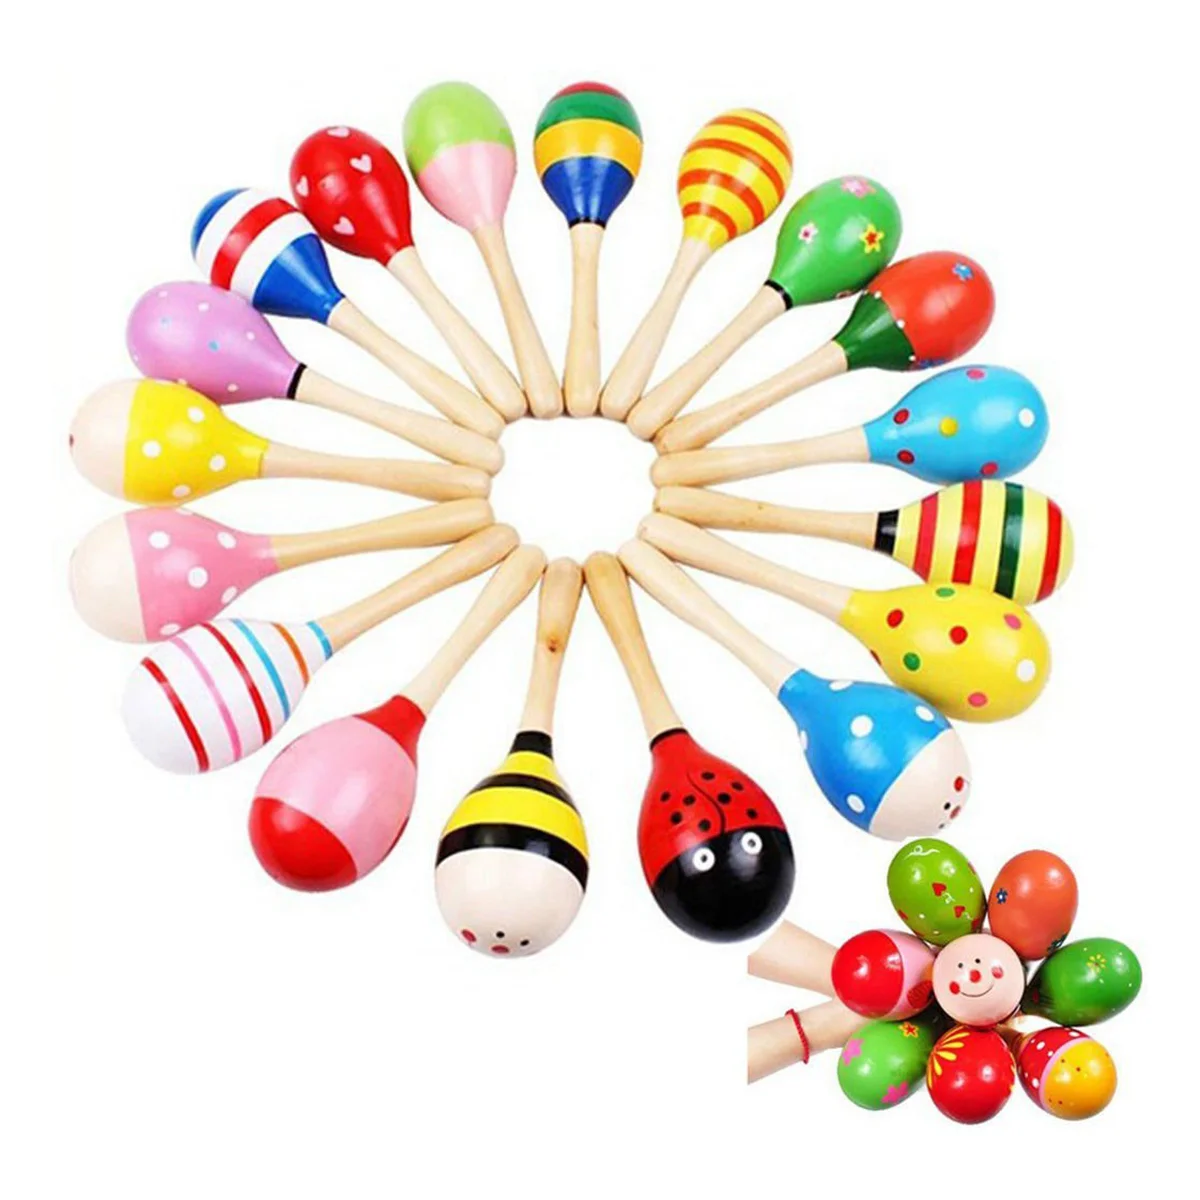 

Maracas Toys Shaker Musical Instrument Wooden Sand Kids Baby Percussion Wood Mini Shakers Shaking Fiesta Egg Noisemaker Toy